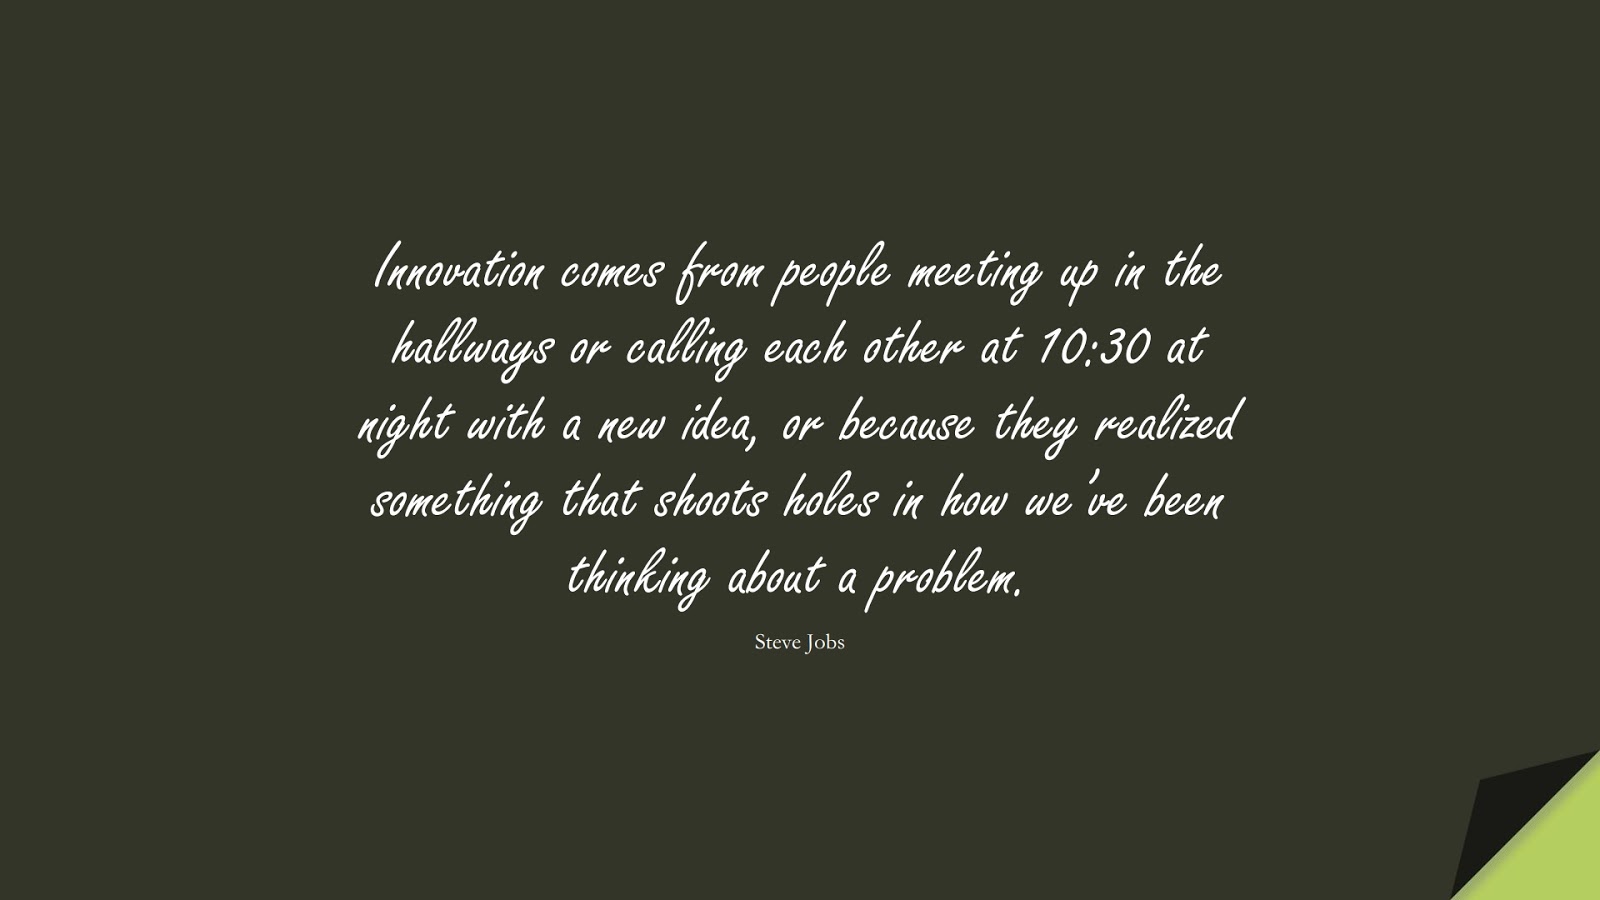 Innovation comes from people meeting up in the hallways or calling each other at 10:30 at night with a new idea, or because they realized something that shoots holes in how we’ve been thinking about a problem. (Steve Jobs);  #SteveJobsQuotes